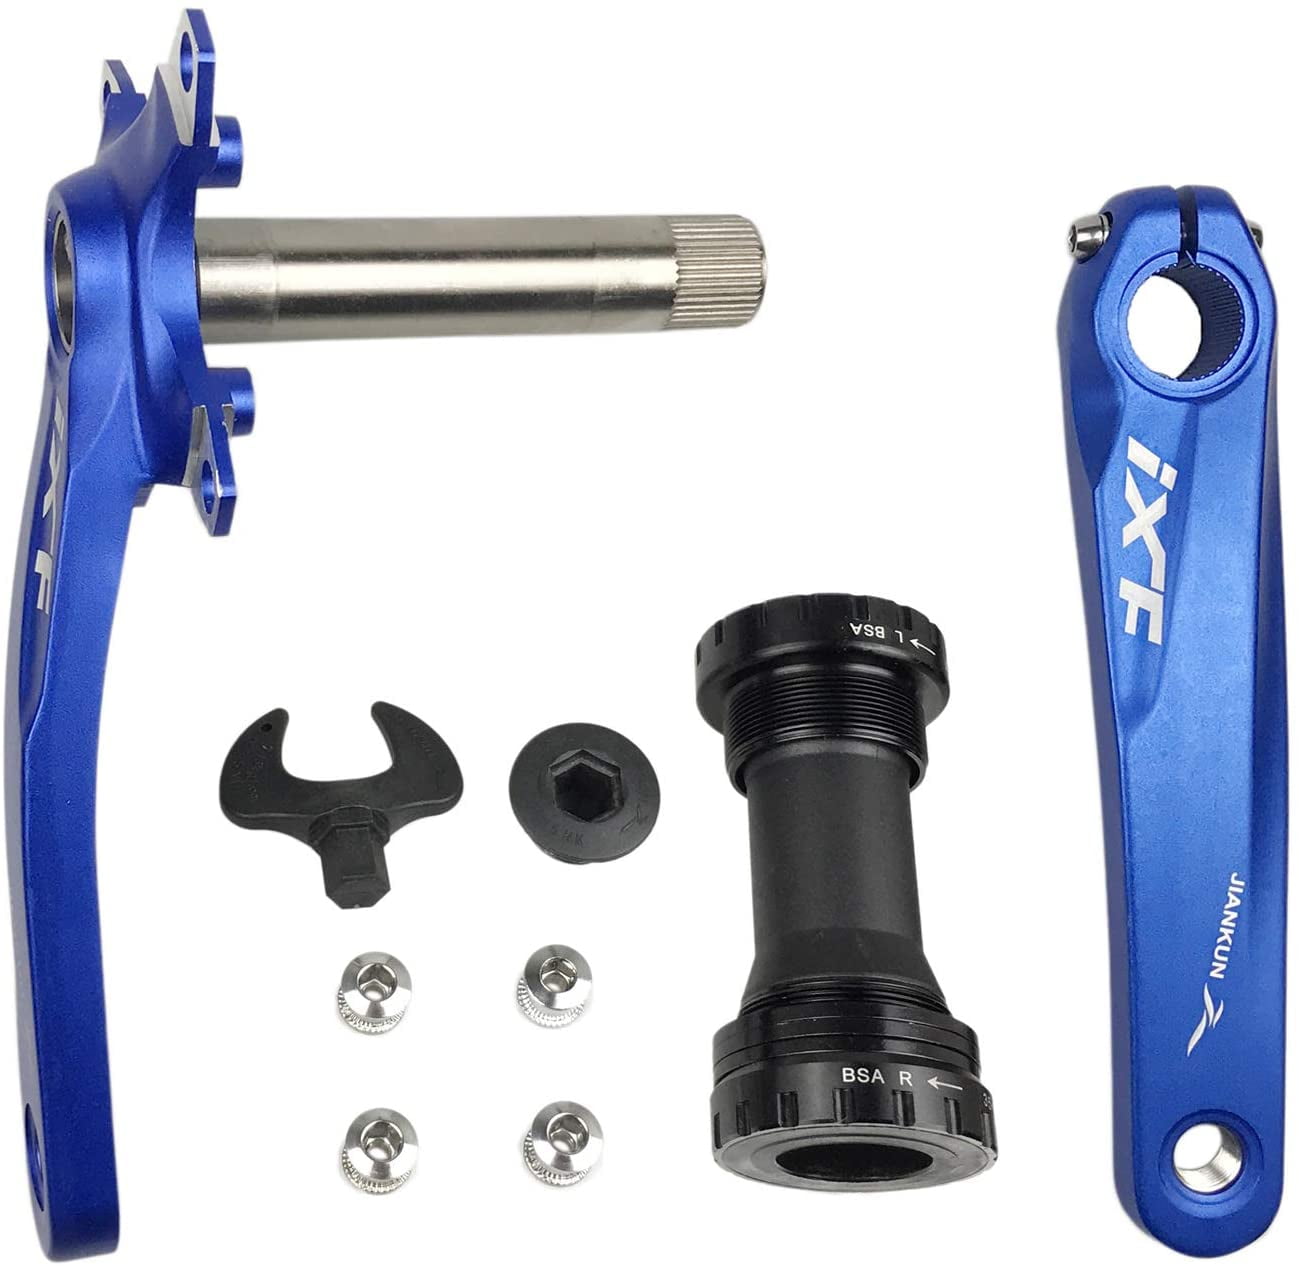 MTB BMX Road Bicycle Crank Arm Set for Bike Crank Replacement 170mm 104 BCD Mountain Bike Crank Set with Bottom Bracket Kit and Chainring Bolts Compatible with Shimano FSA GAINT 